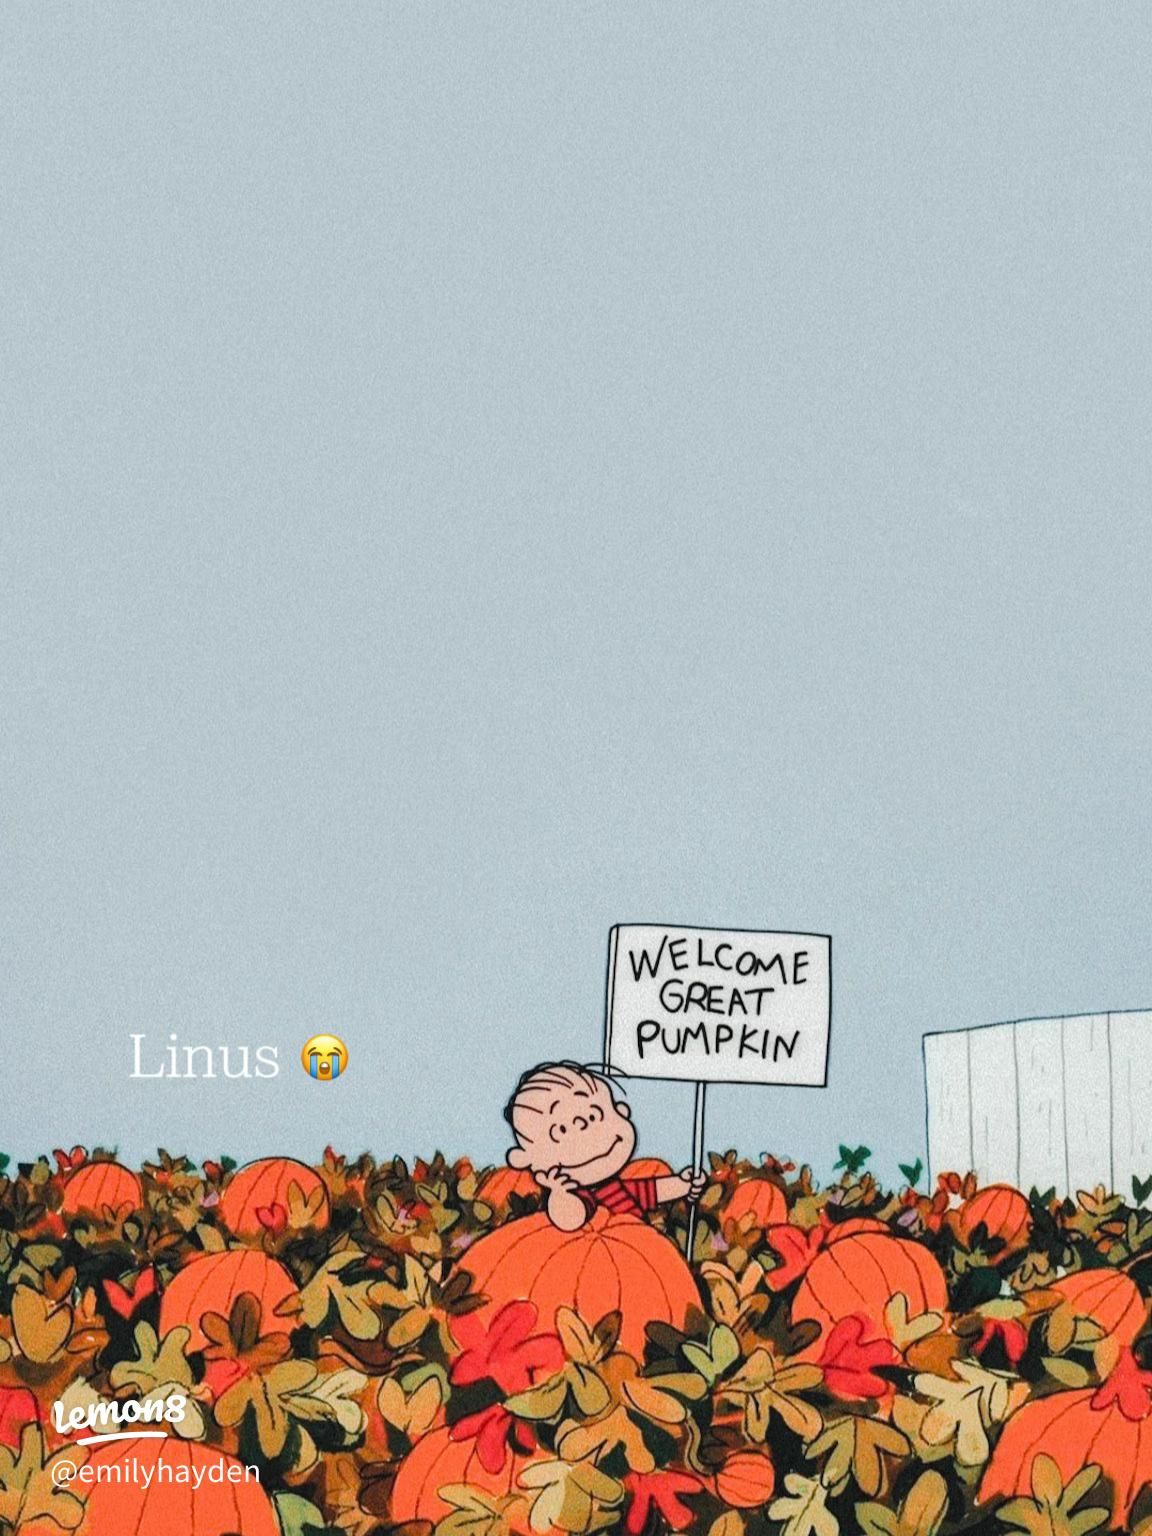 Linus from peanuts sitting on a pumpkin with a sign that says 